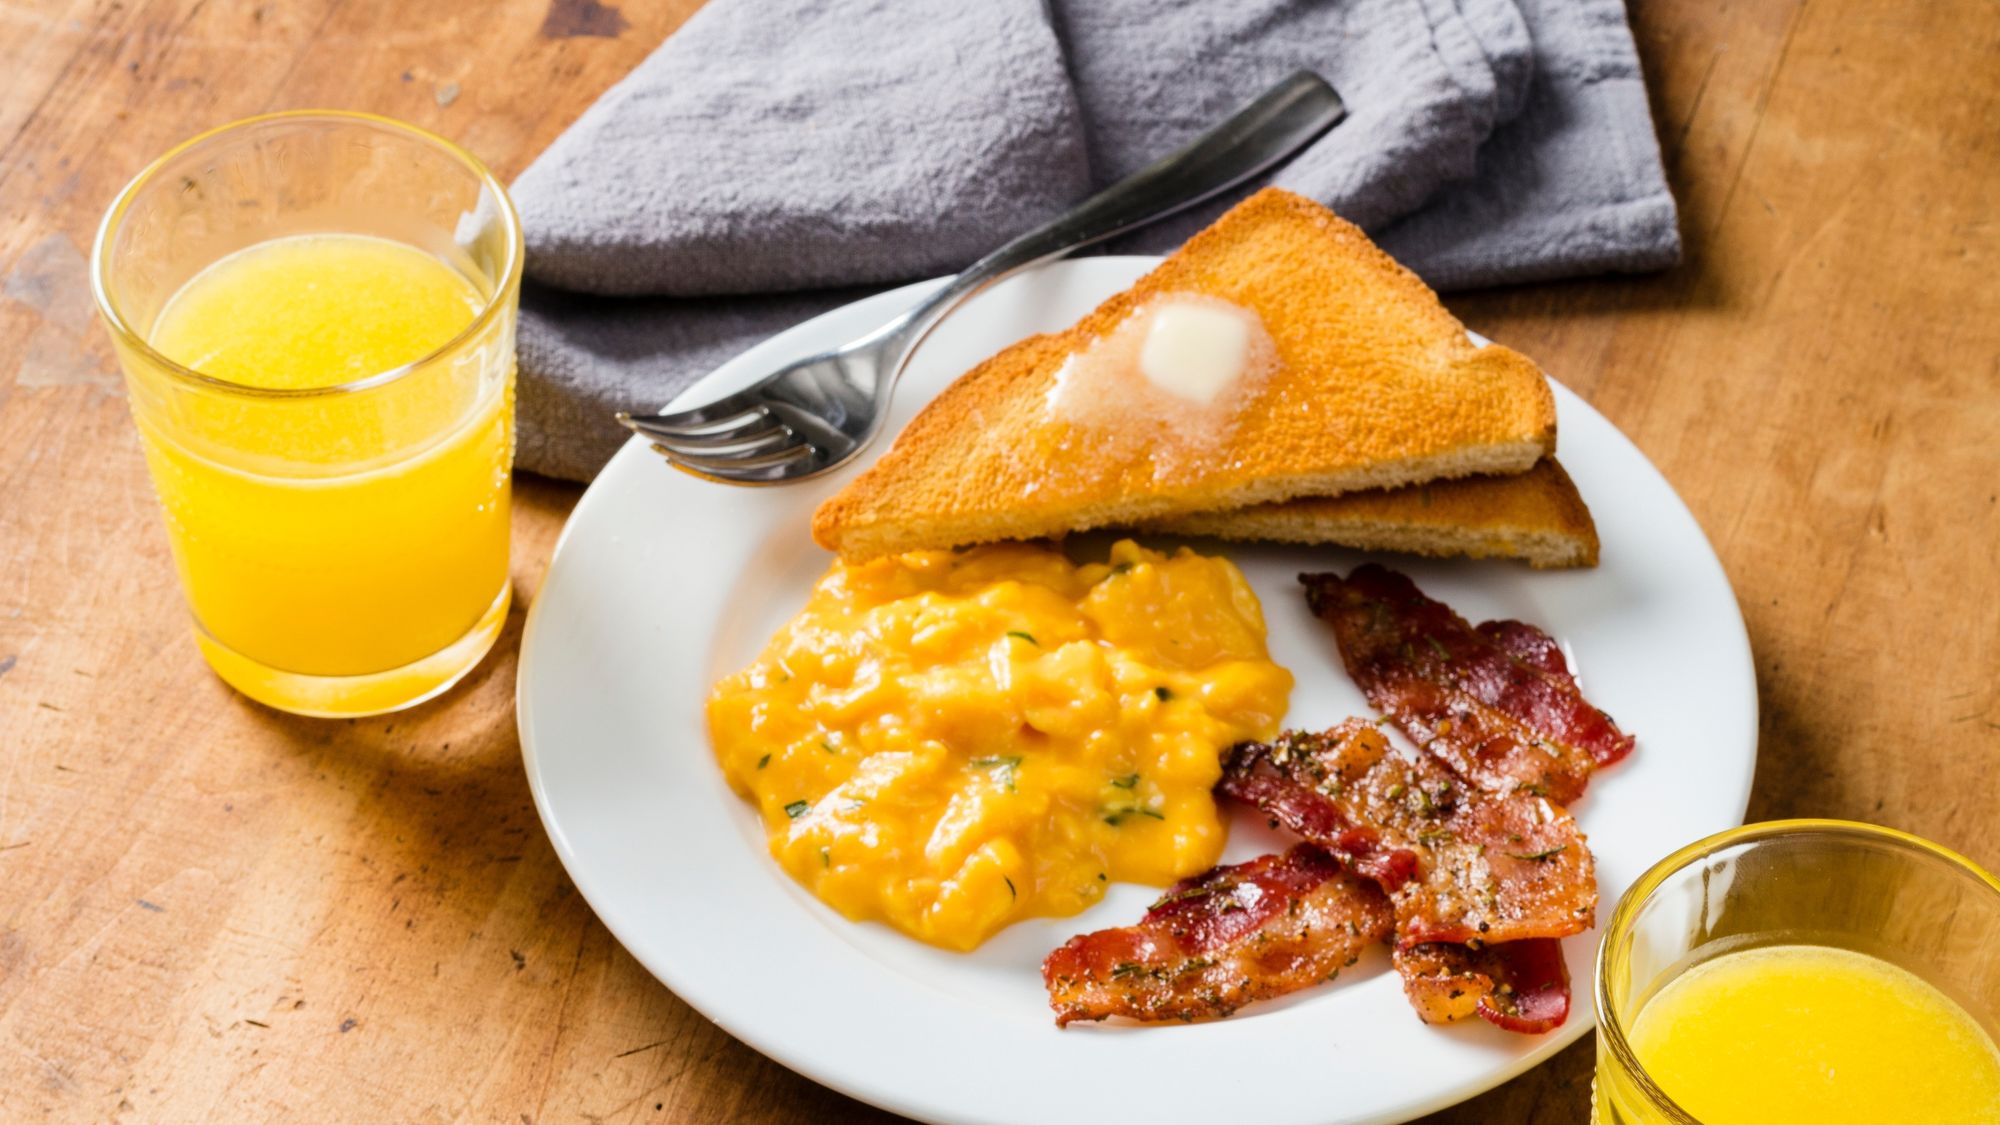 Take bacon and eggs to an extravagant level